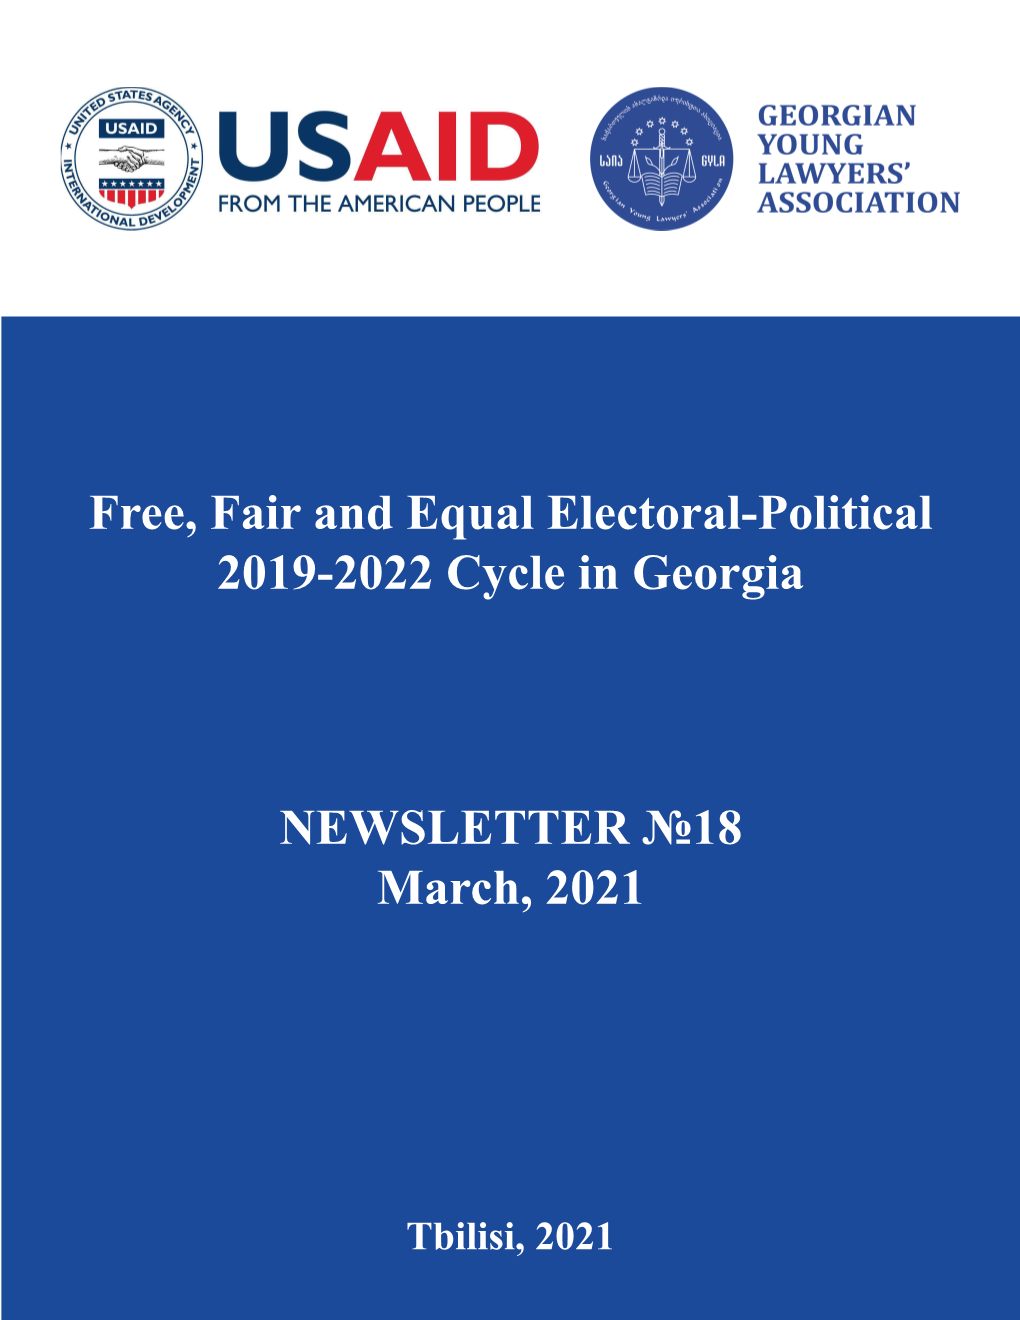 Free, Fair and Equal Electoral-Political 2019-2022 Cycle in Georgia